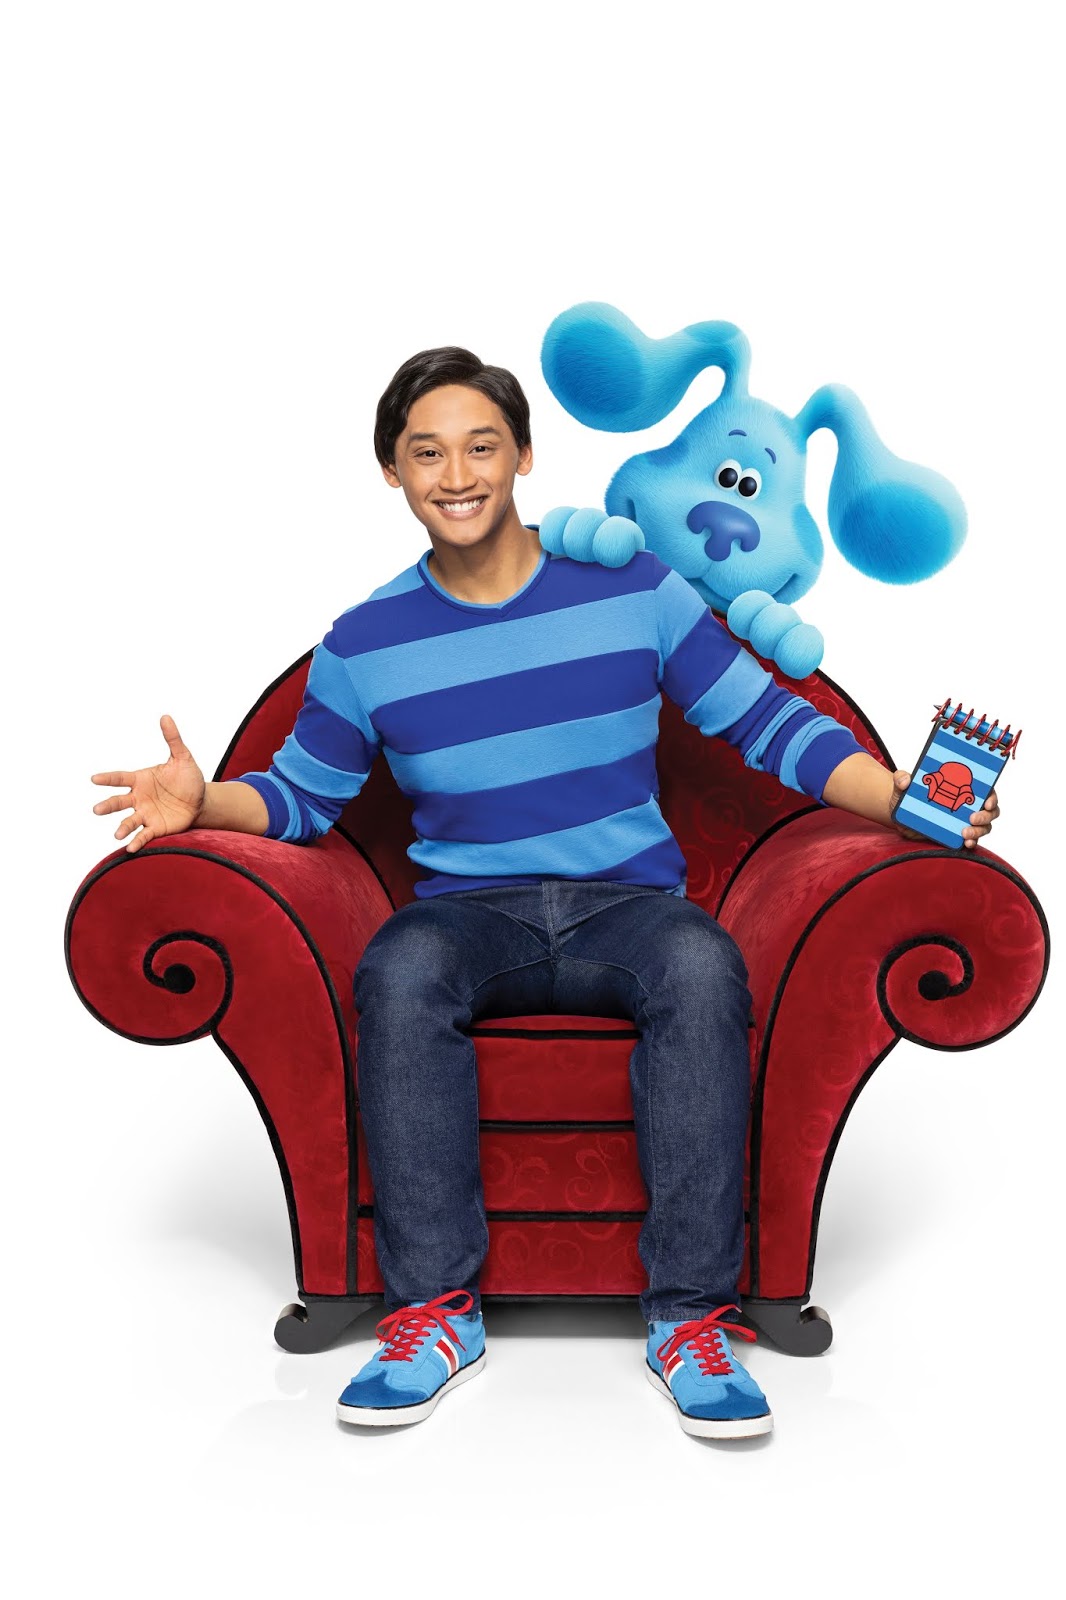 Nickalive Blue S Clues You To Bow On Nick Jr Asia On